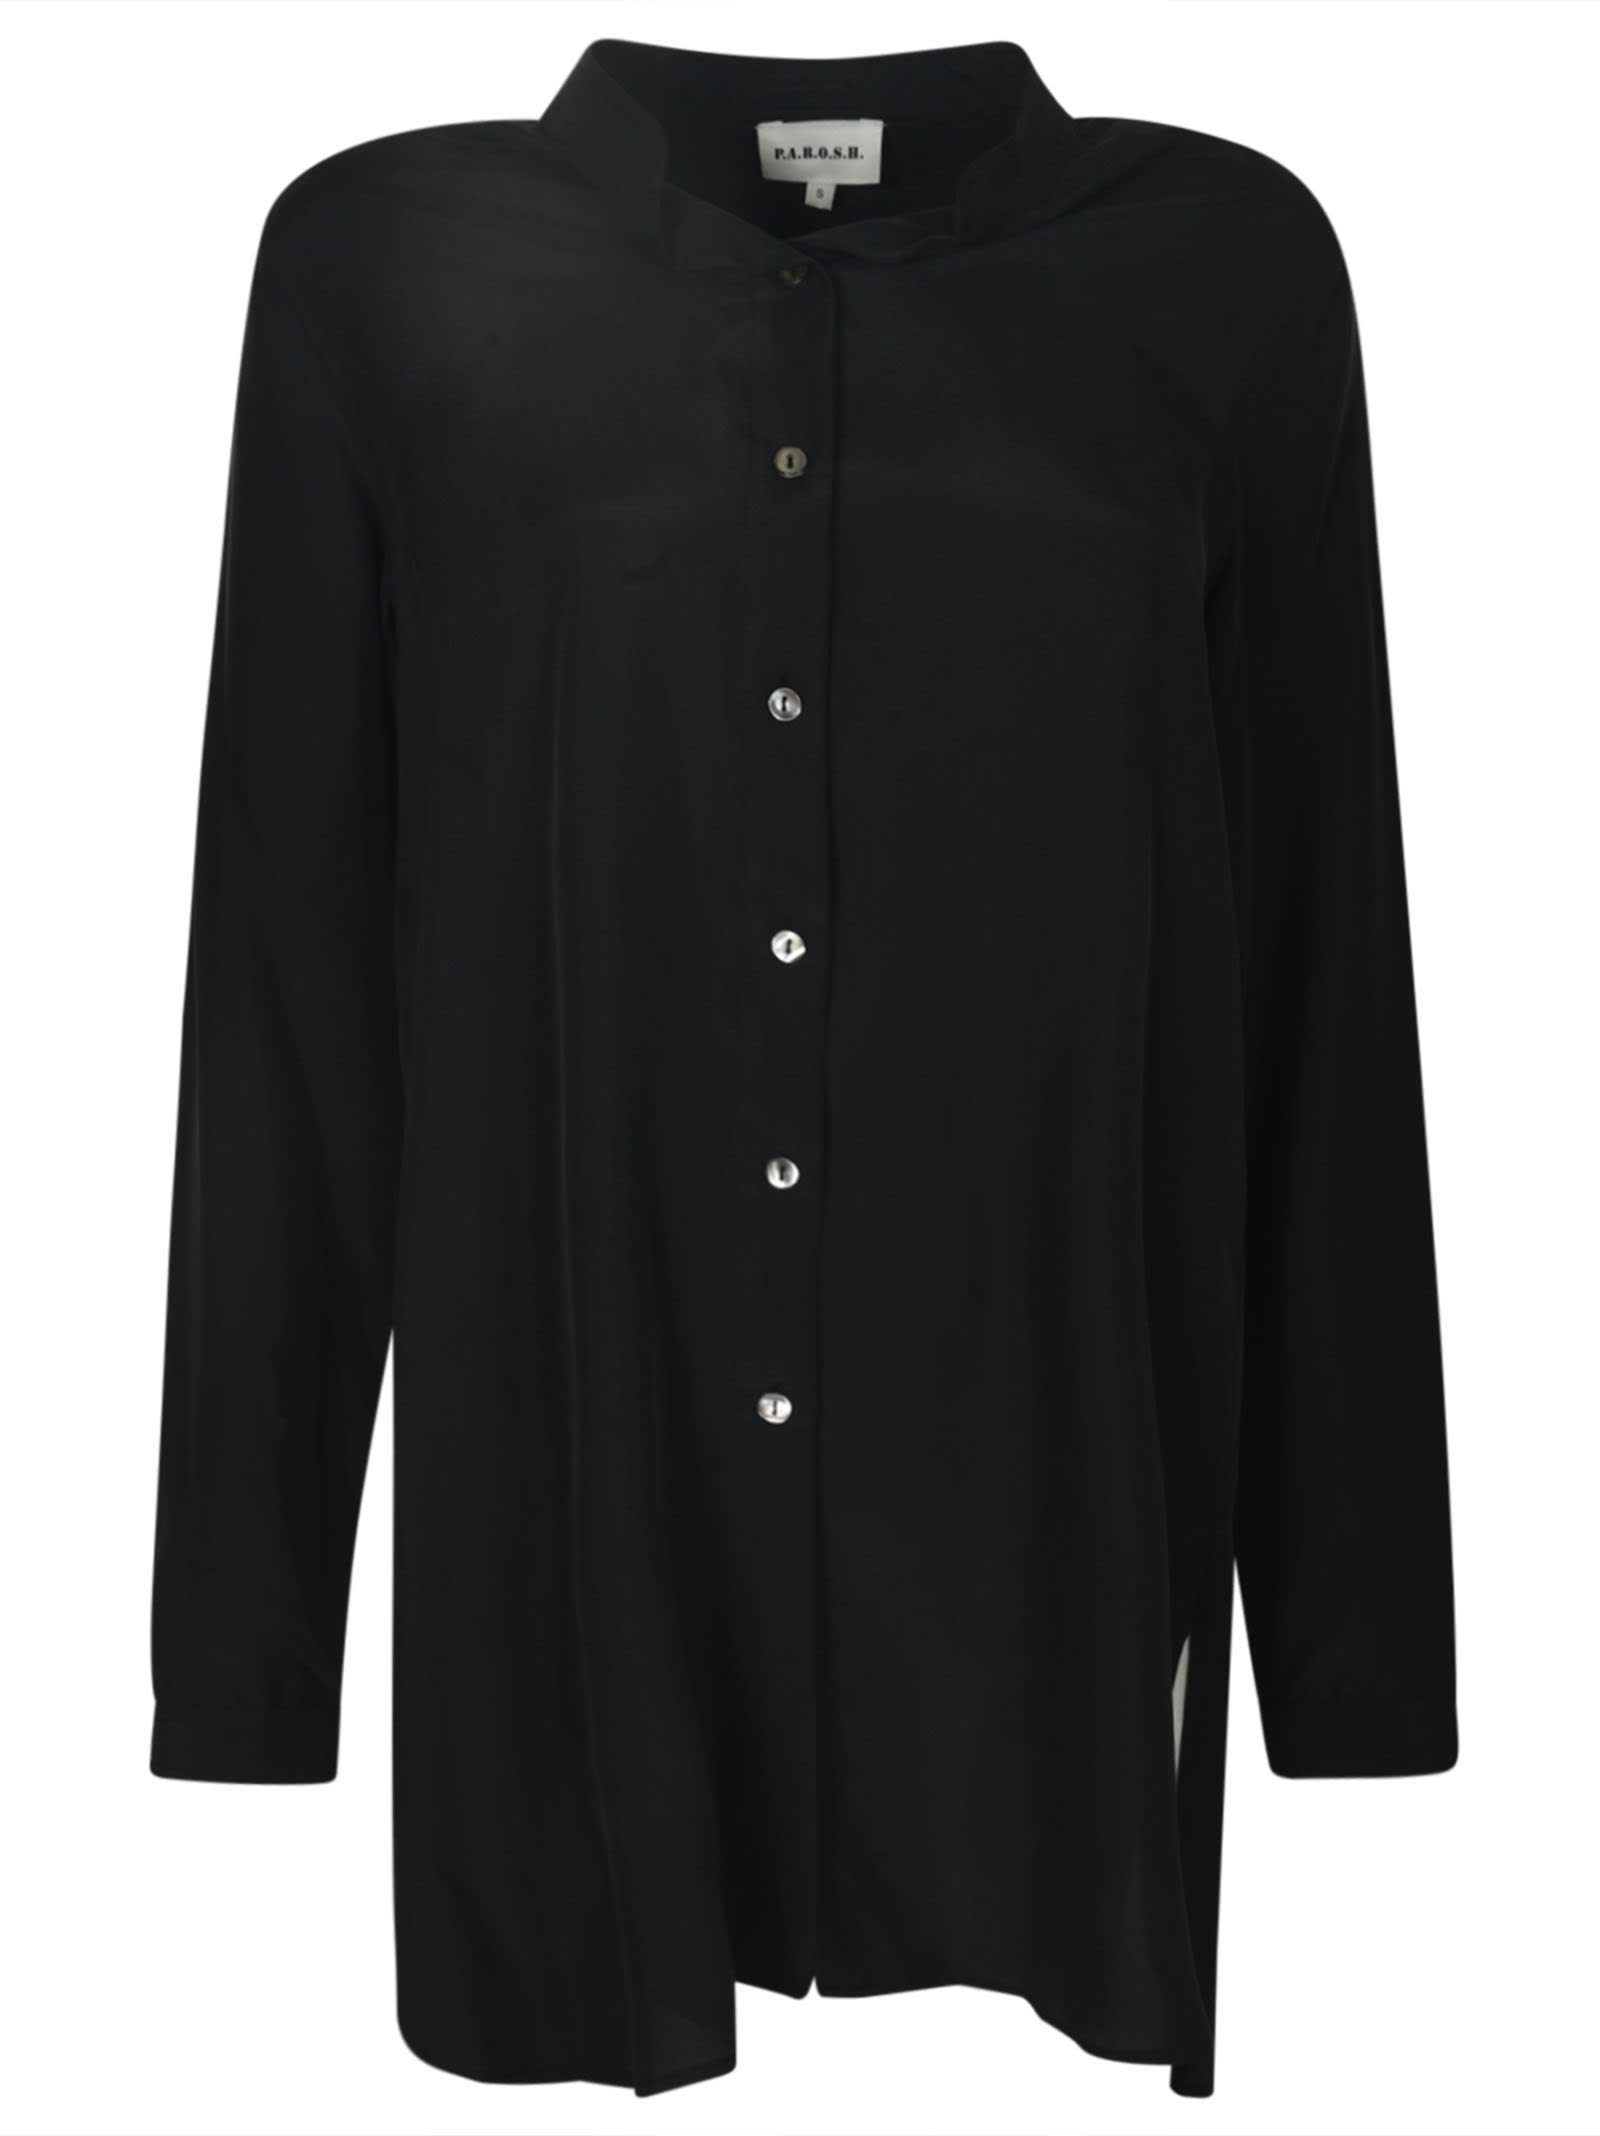 P.a.r.o.s.h Long-sleeved Shirt In Nero